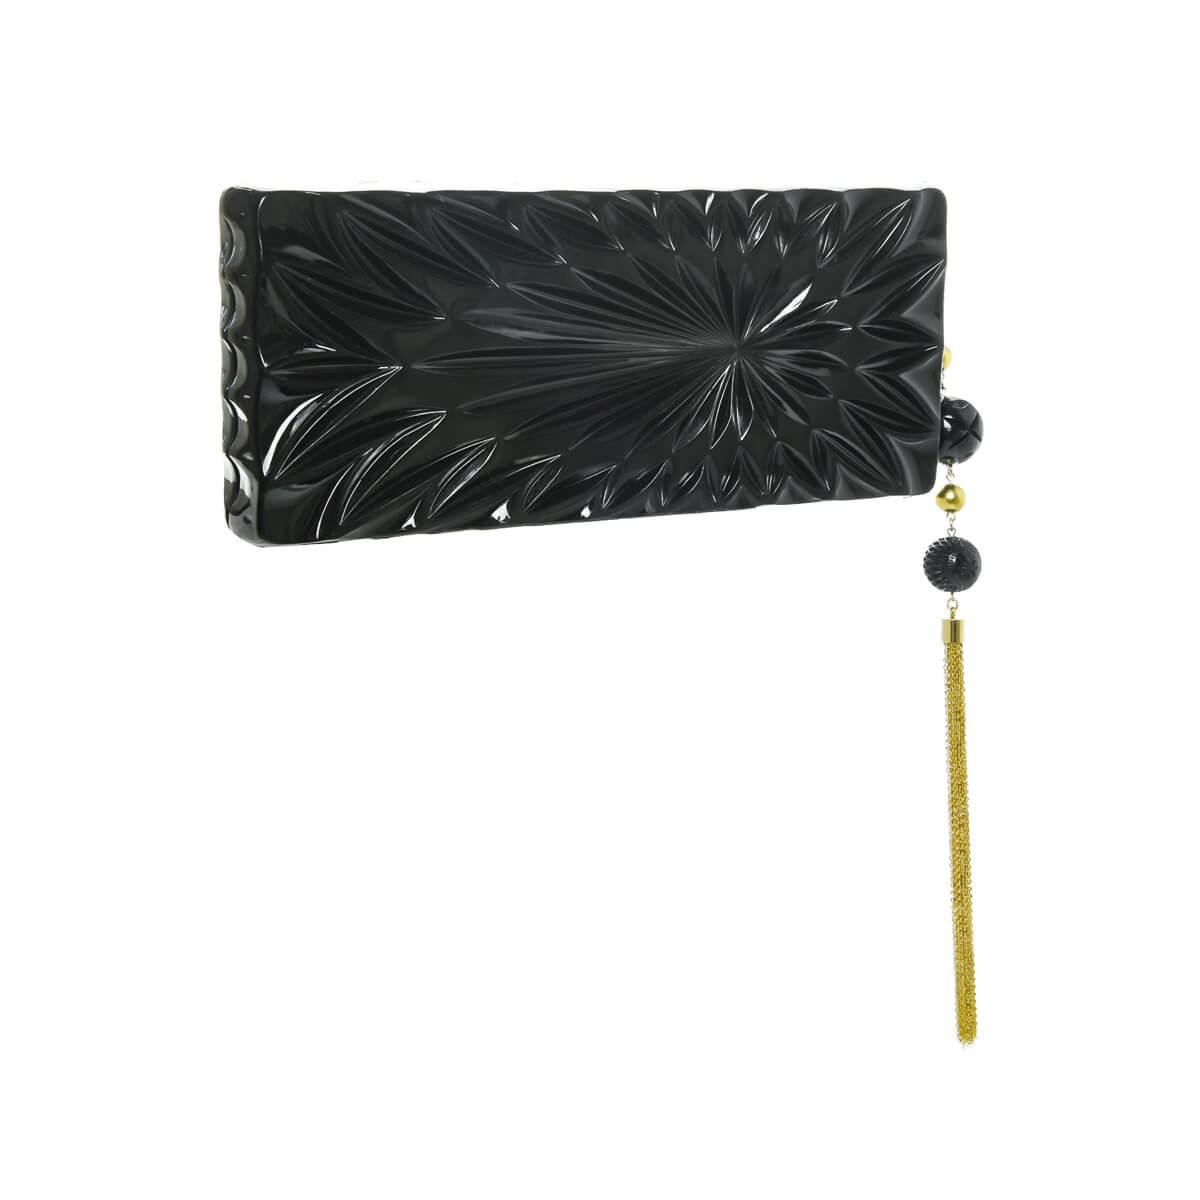 [MADE-TO-ORDER] Hand Carved Long Rectangle Clutch Black